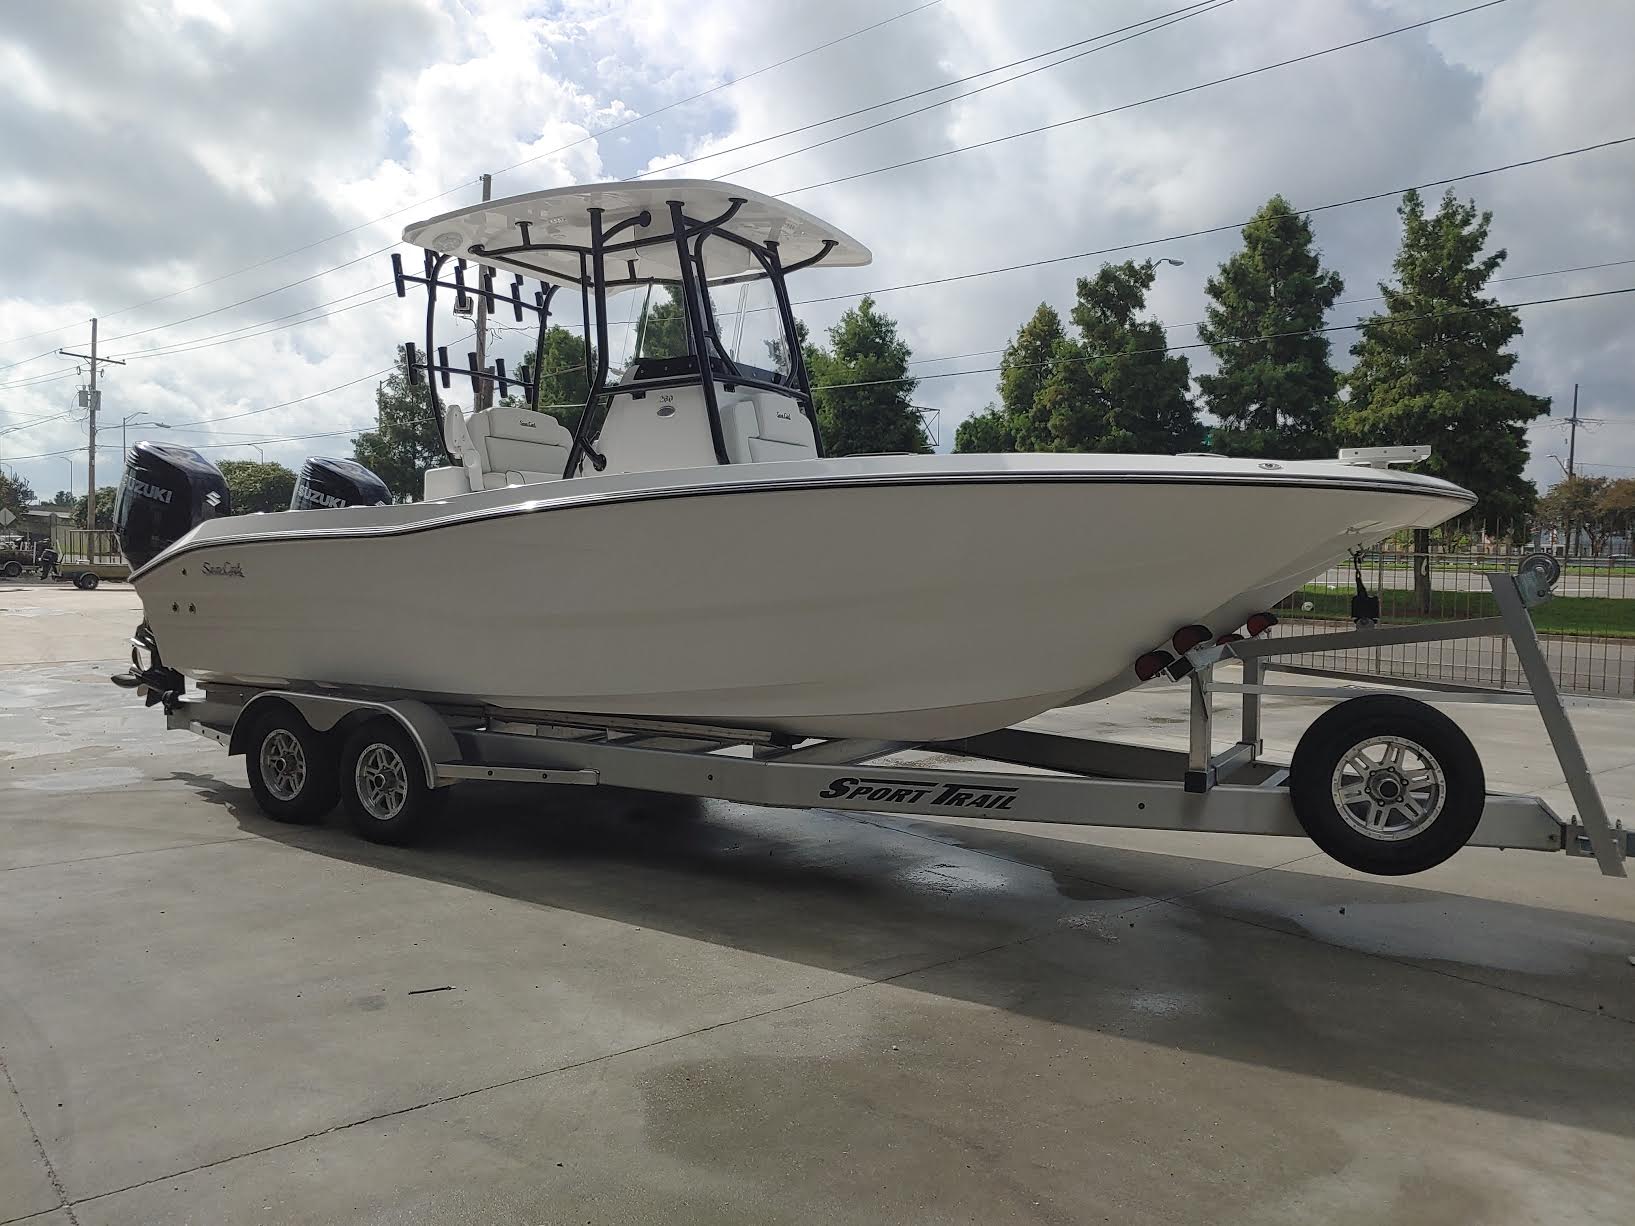 2022 Sea Cat boat for sale, model of the boat is 260 & Image # 9 of 9